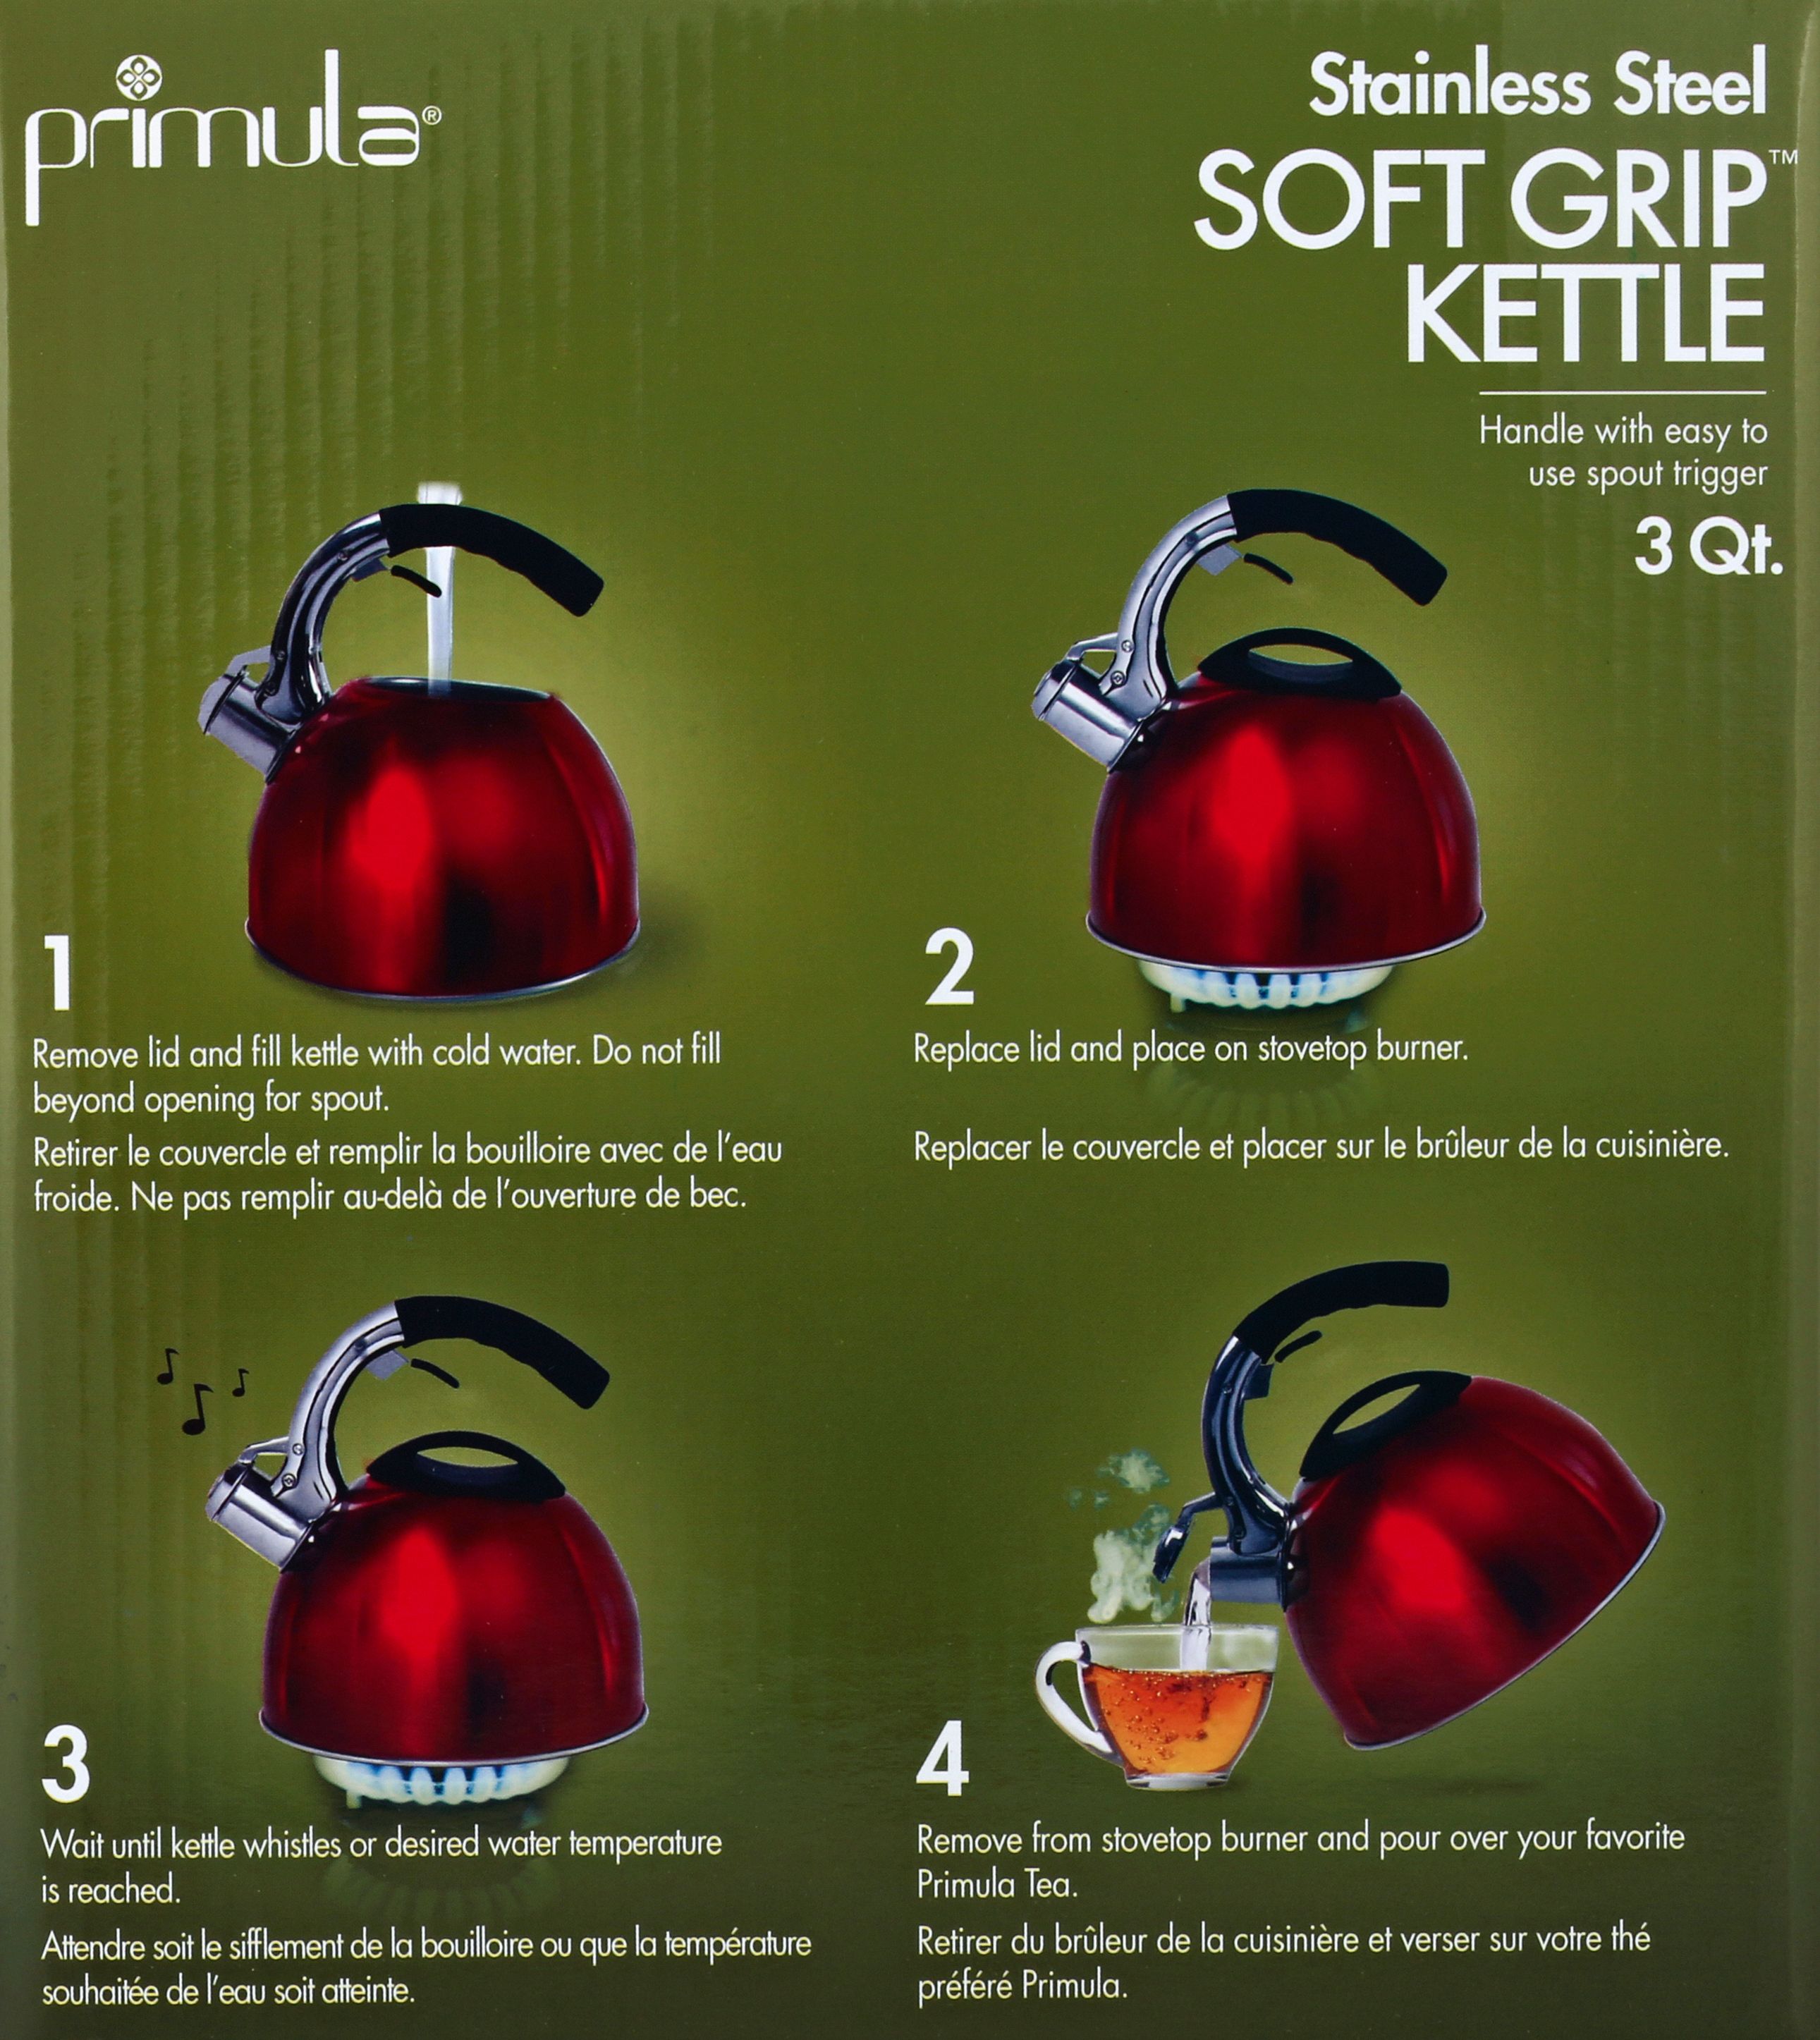 Primula Soft Grip 3 Qt. Stainless Steel Whistling Kettle - Red - image 4 of 8